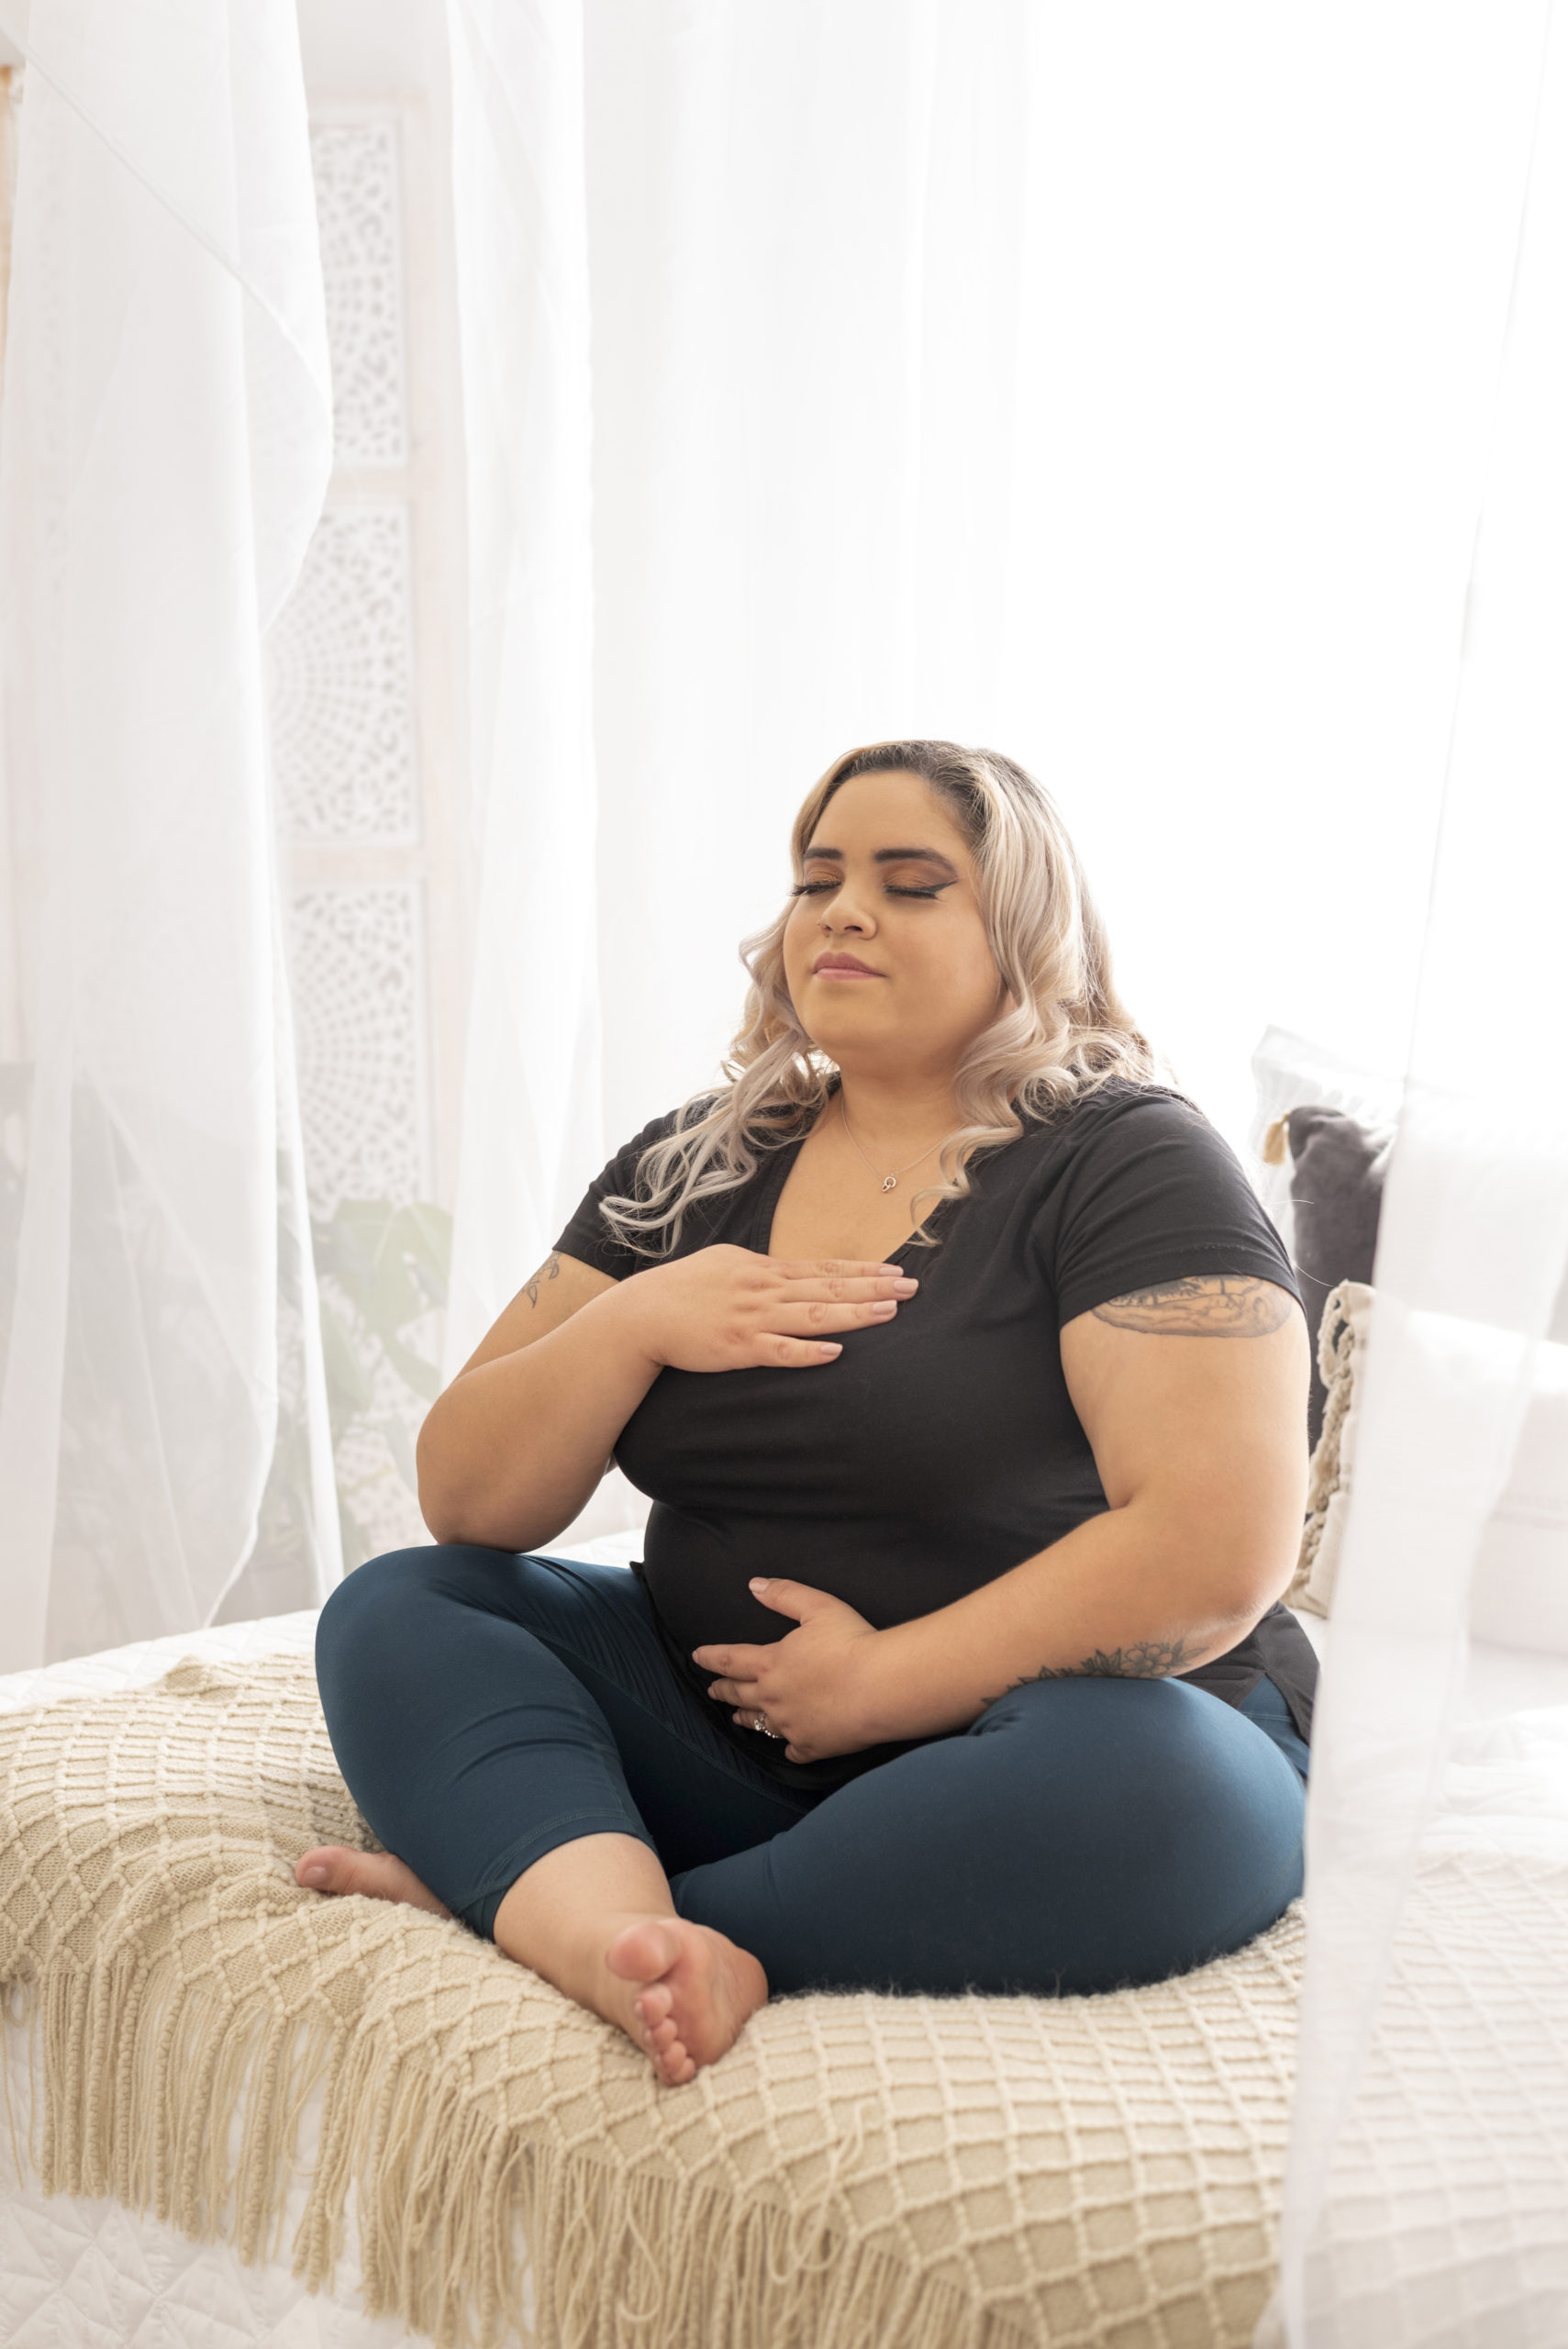 plus-size-woman-wearing-a-black-top-and-a-blue-denim-pant-sitting-on-a-bed-with-legs-crossed